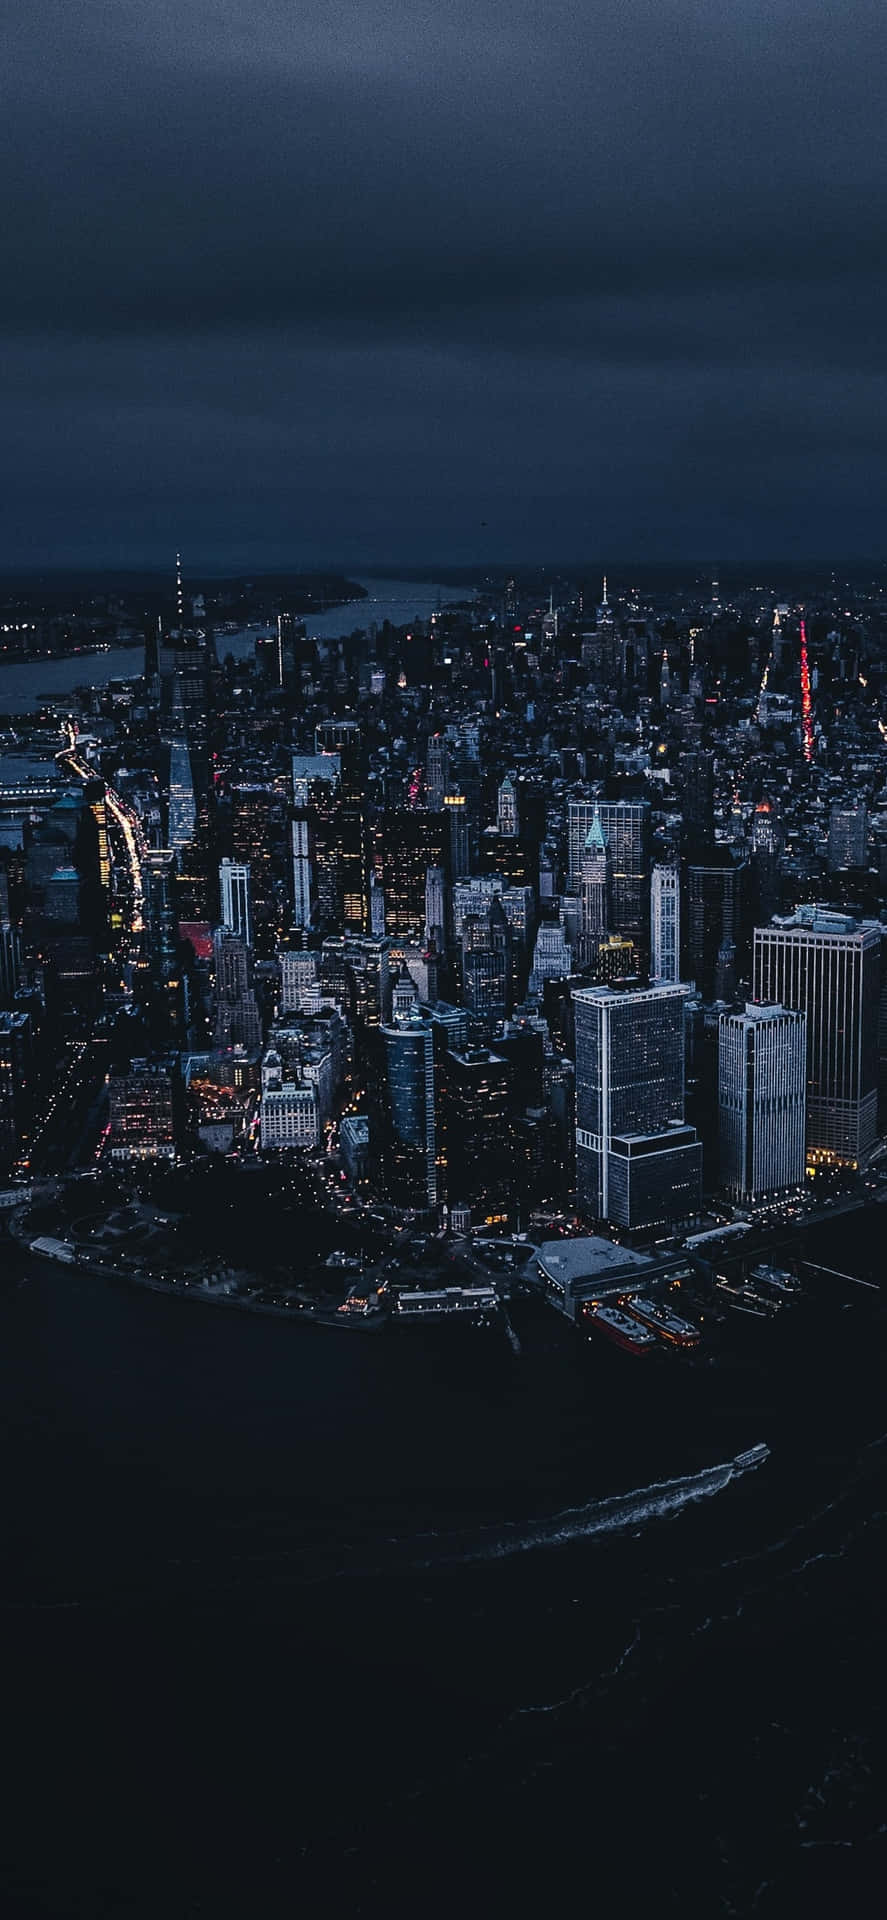 Rise up to new heights with the sleek and modern Iphone Xs at the stunning New York skyline